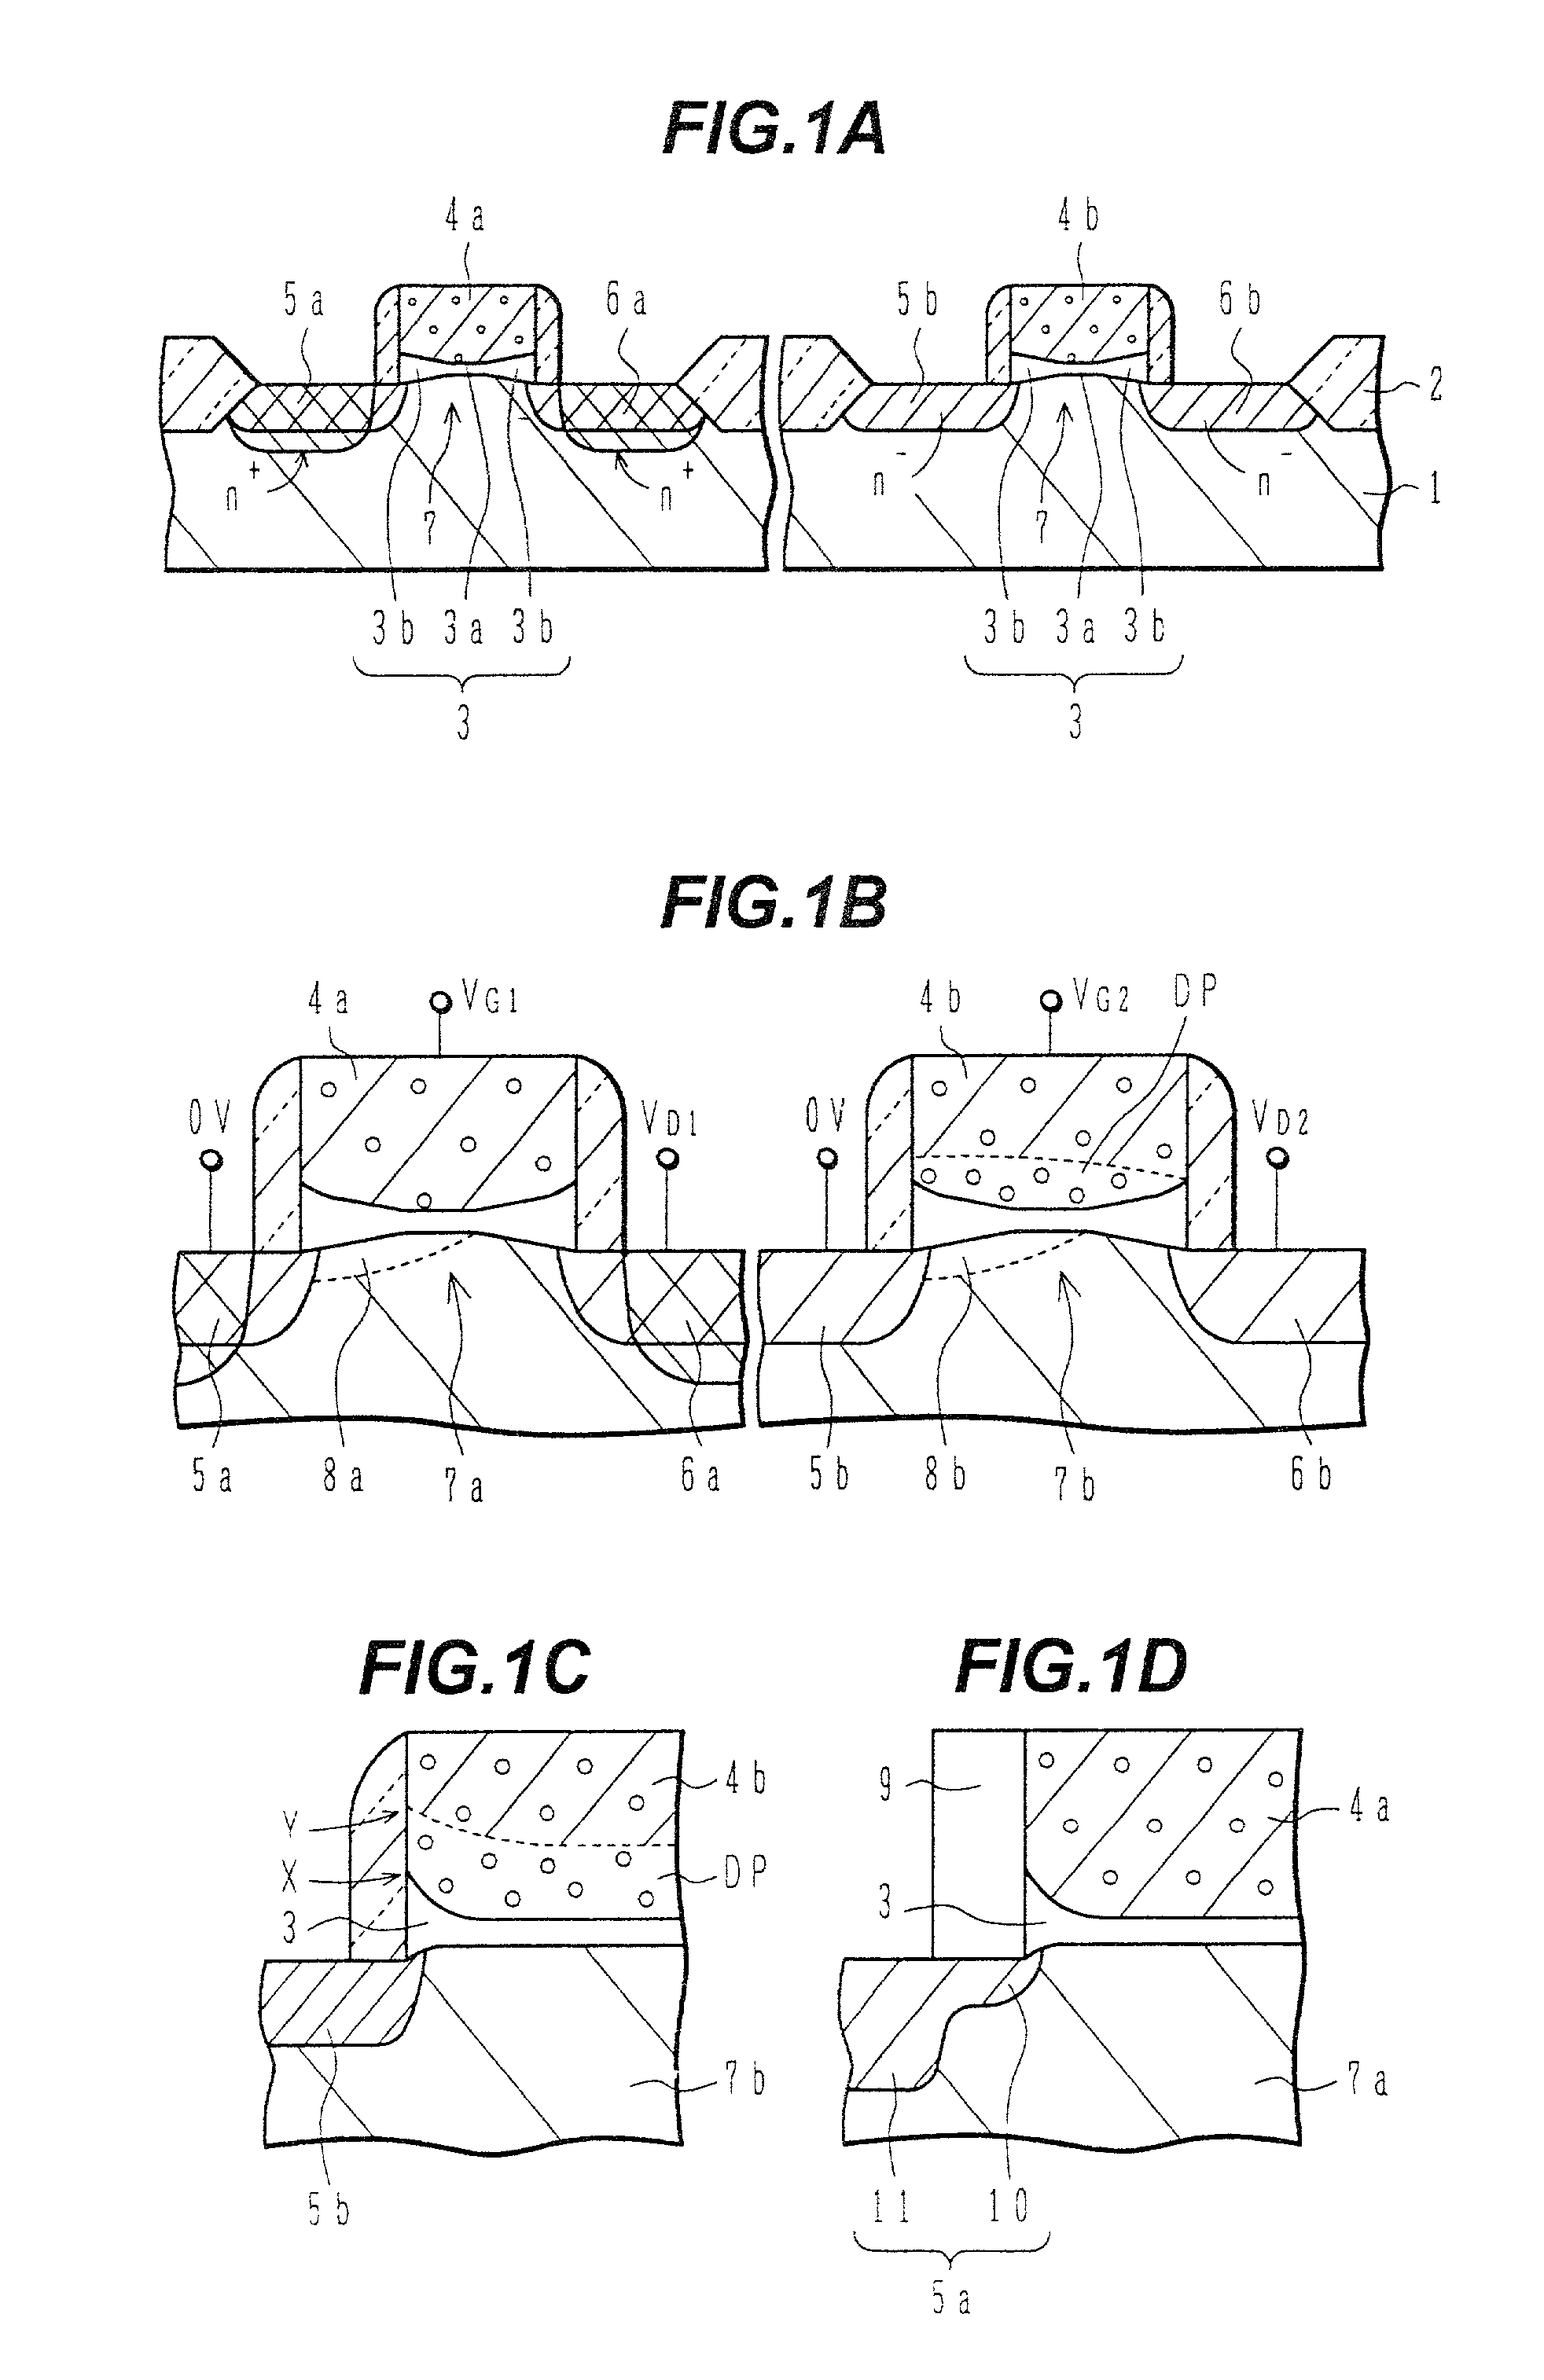 Multi-voltage level semiconductor device and its manufacture